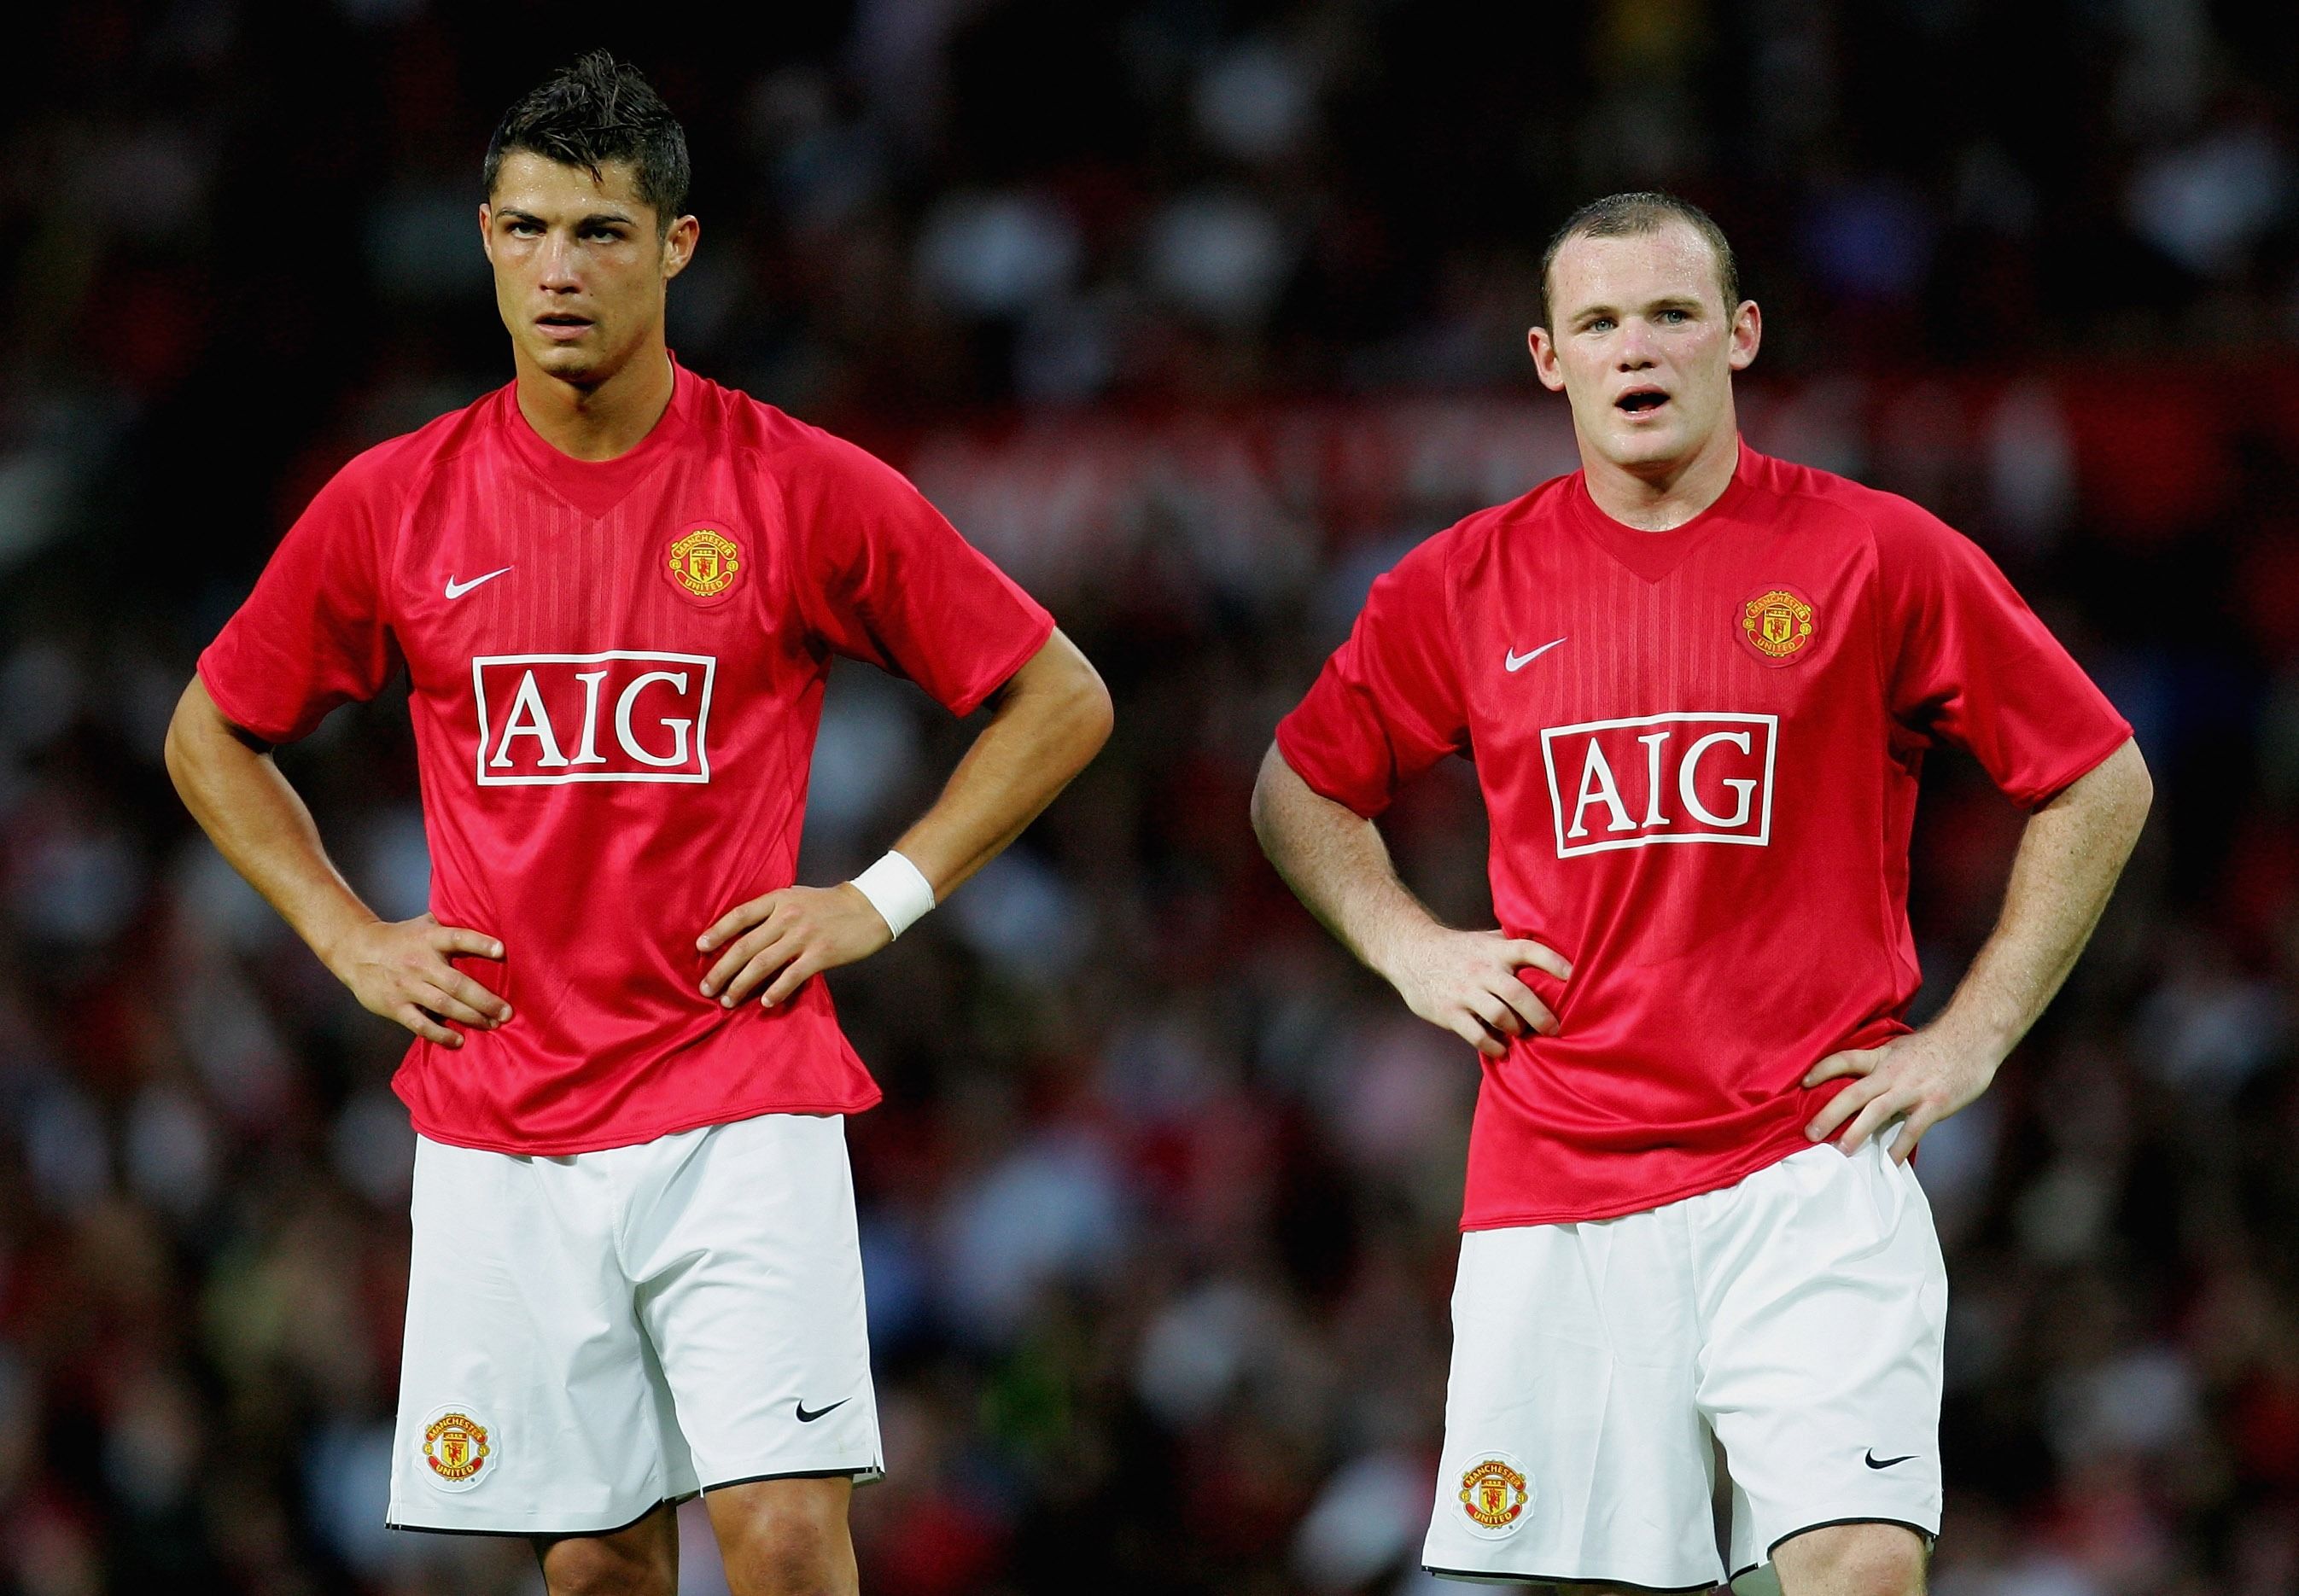 Cristiano Ronaldo and Wayne Rooney look on during a Man Utd game